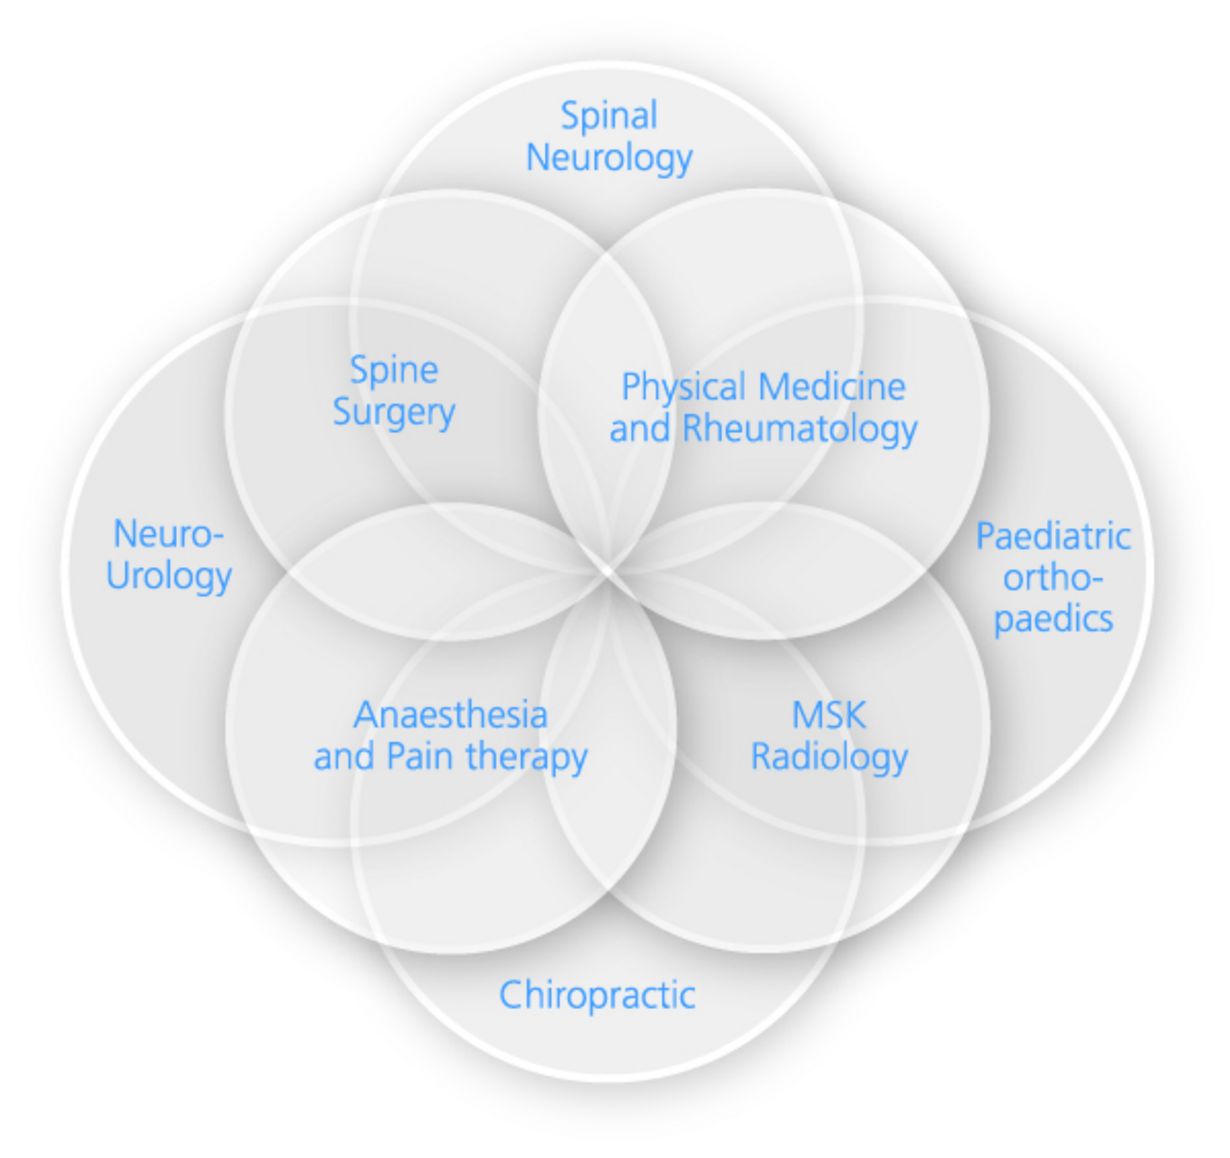 Eight interdisciplinary units are highly specialised in spine medicine